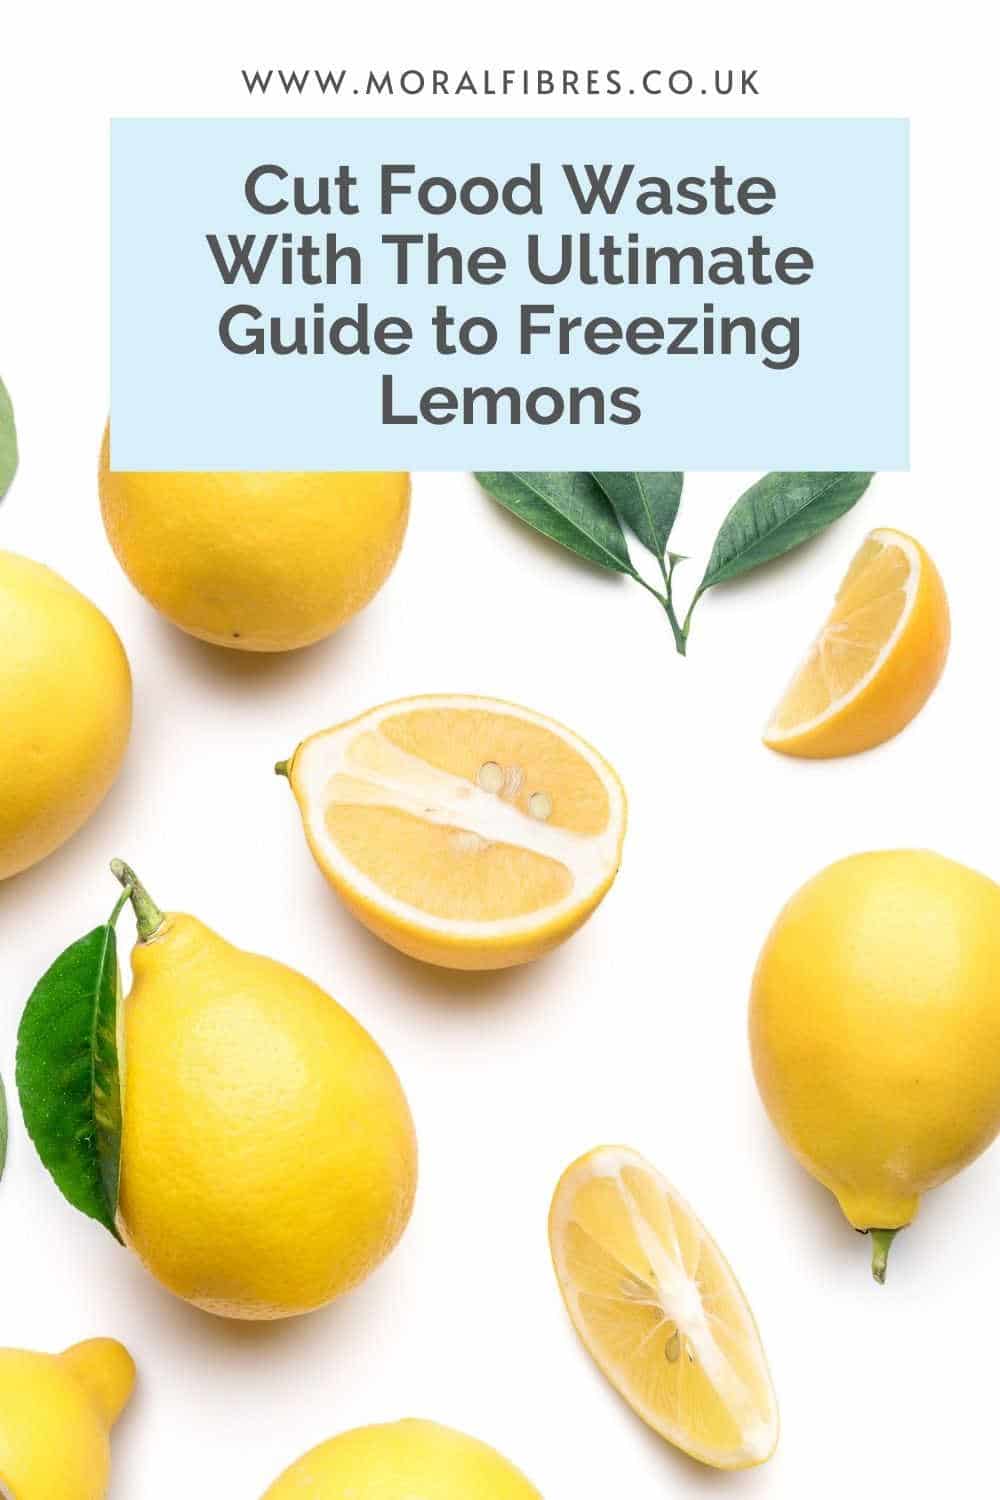 Image of whole and sliced lemons with a blue text box that says cut food waste with the ultimate guide to freezing lemons